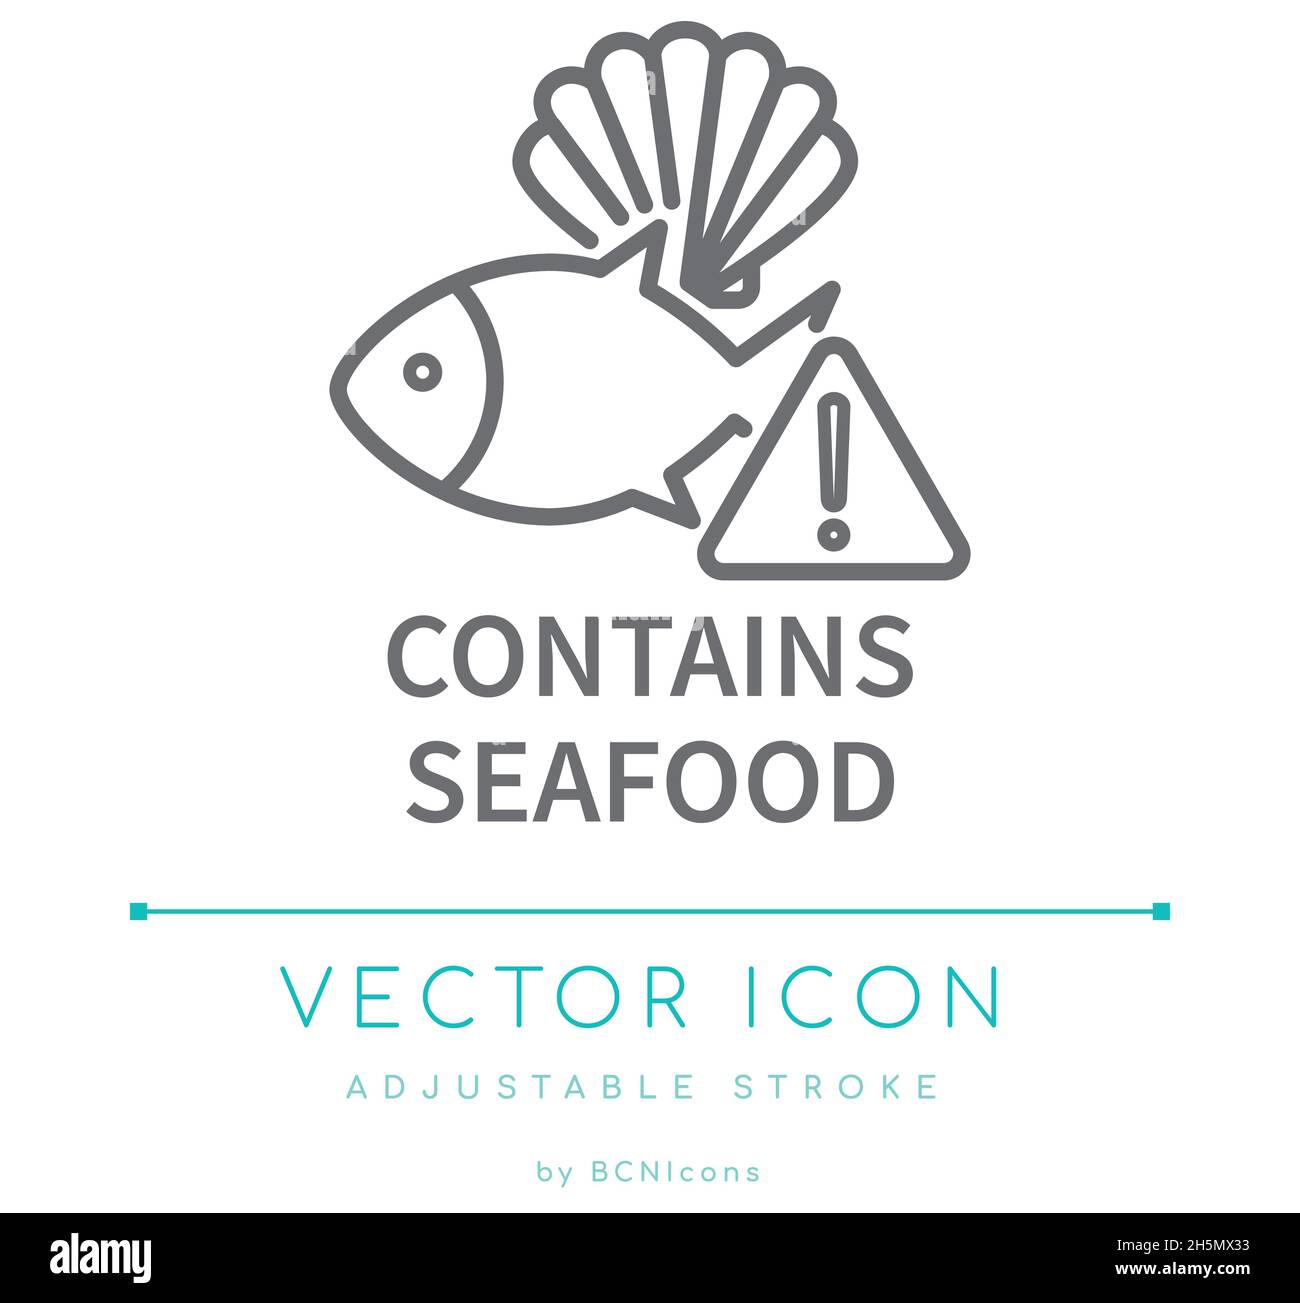 Contains Seafood Food Allergen Warning Vector Line Icon Stock Vector